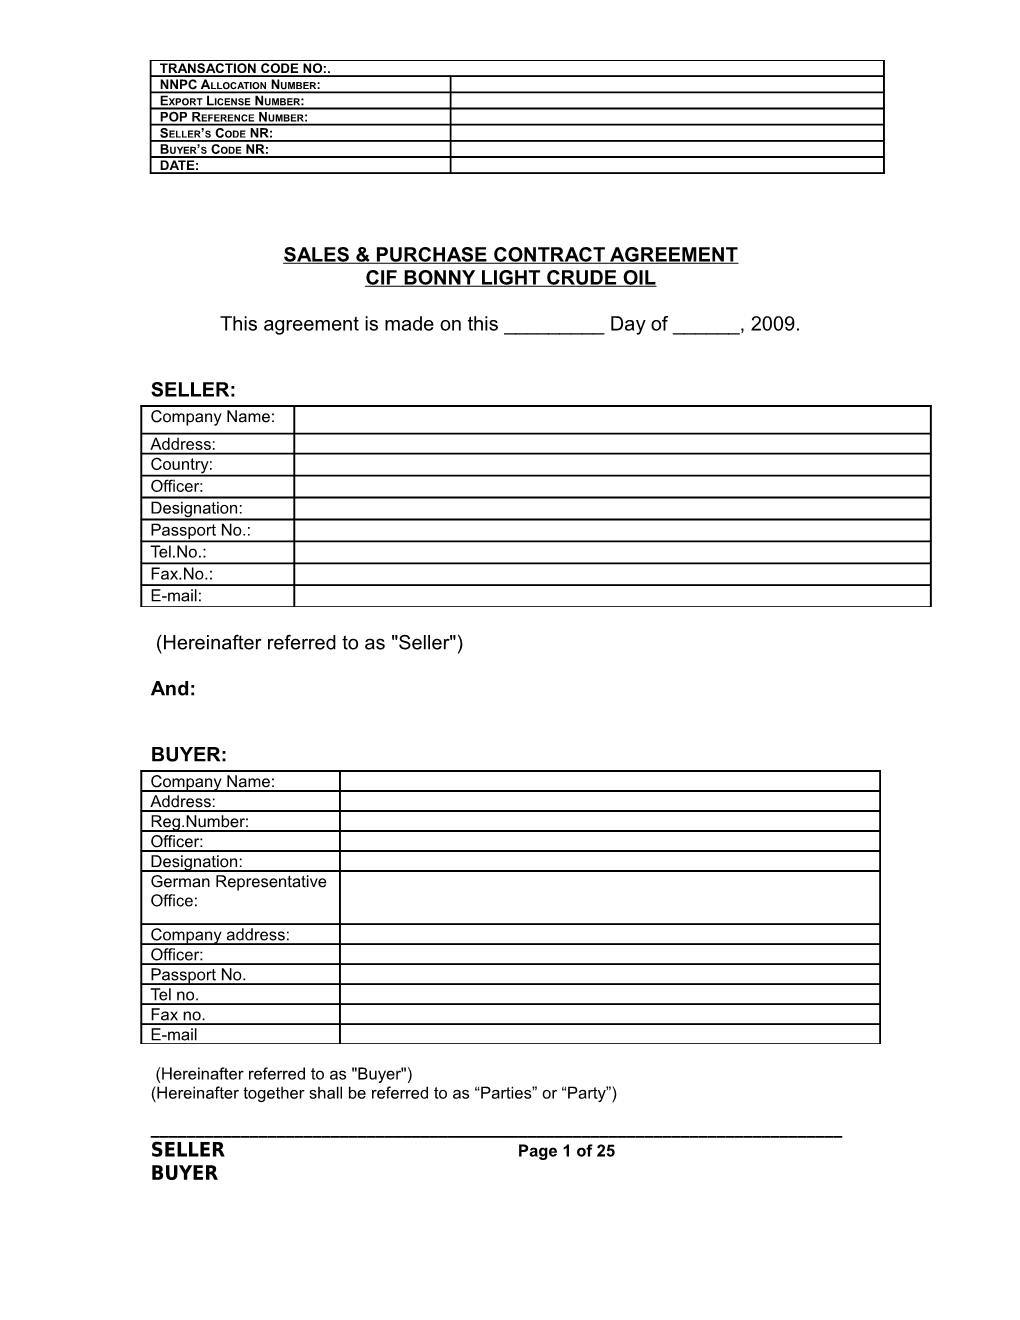 Sales & Purchase Contract Agreement